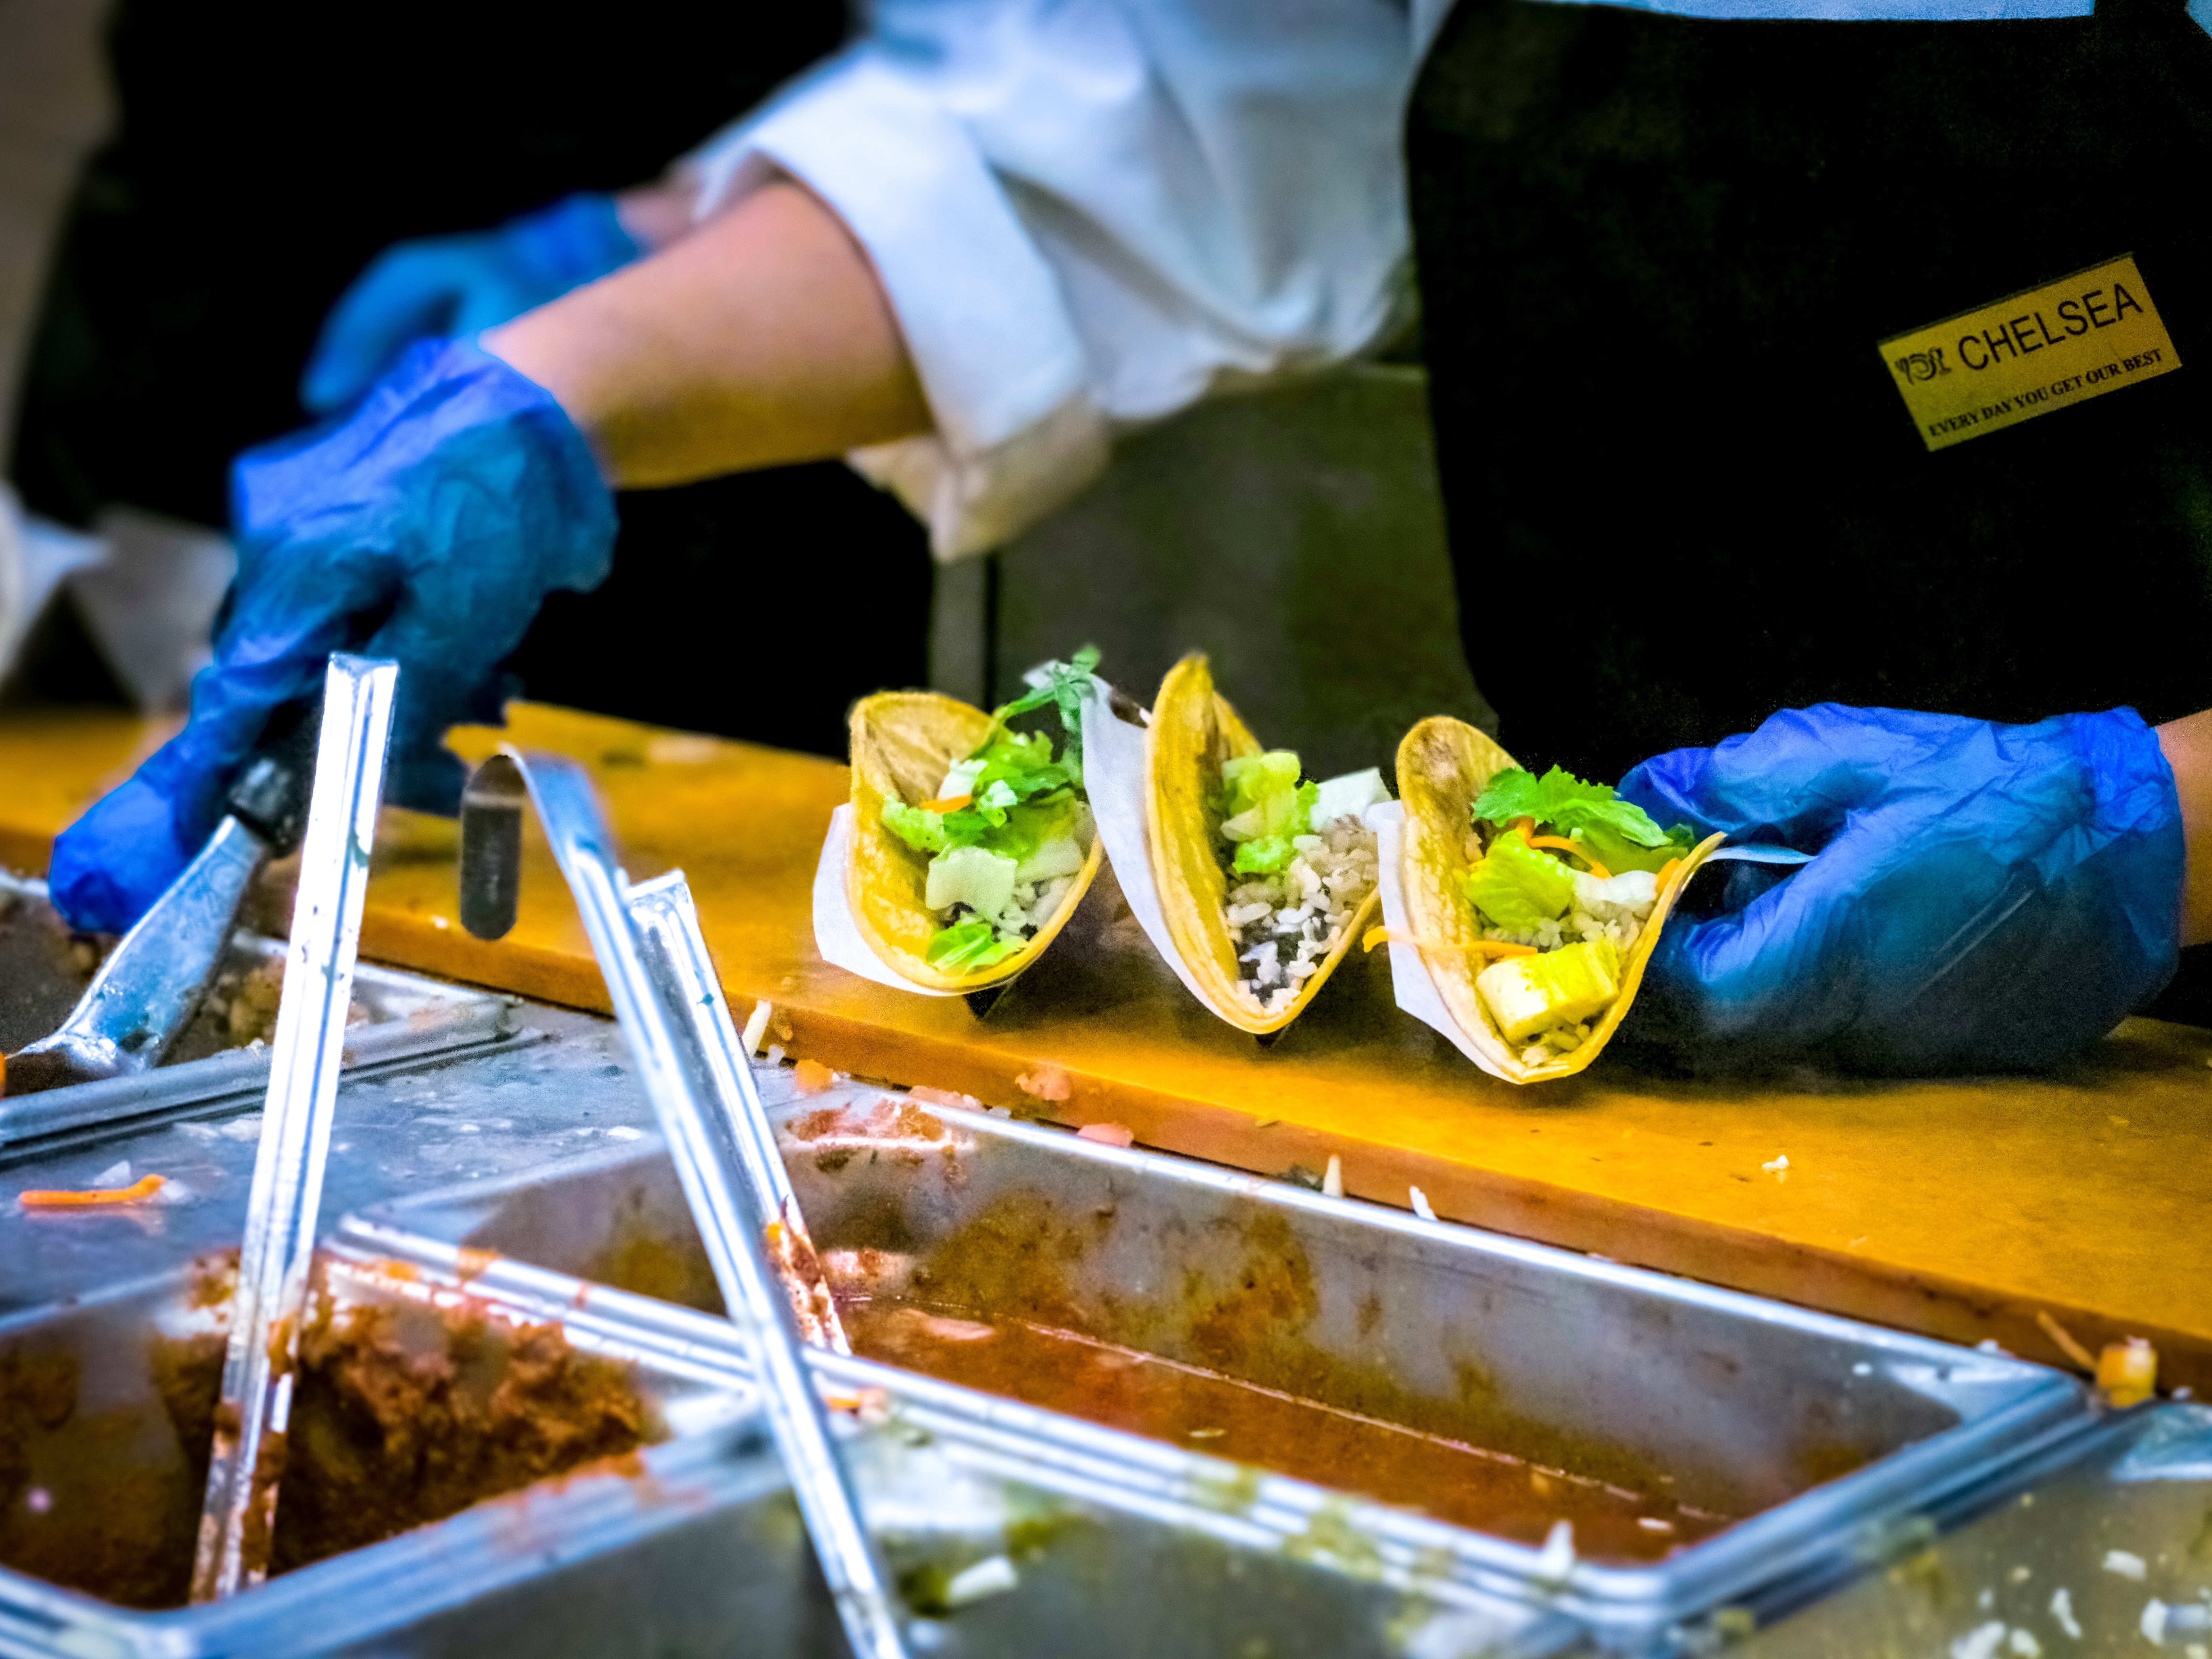 A person in gloves makes tacos.